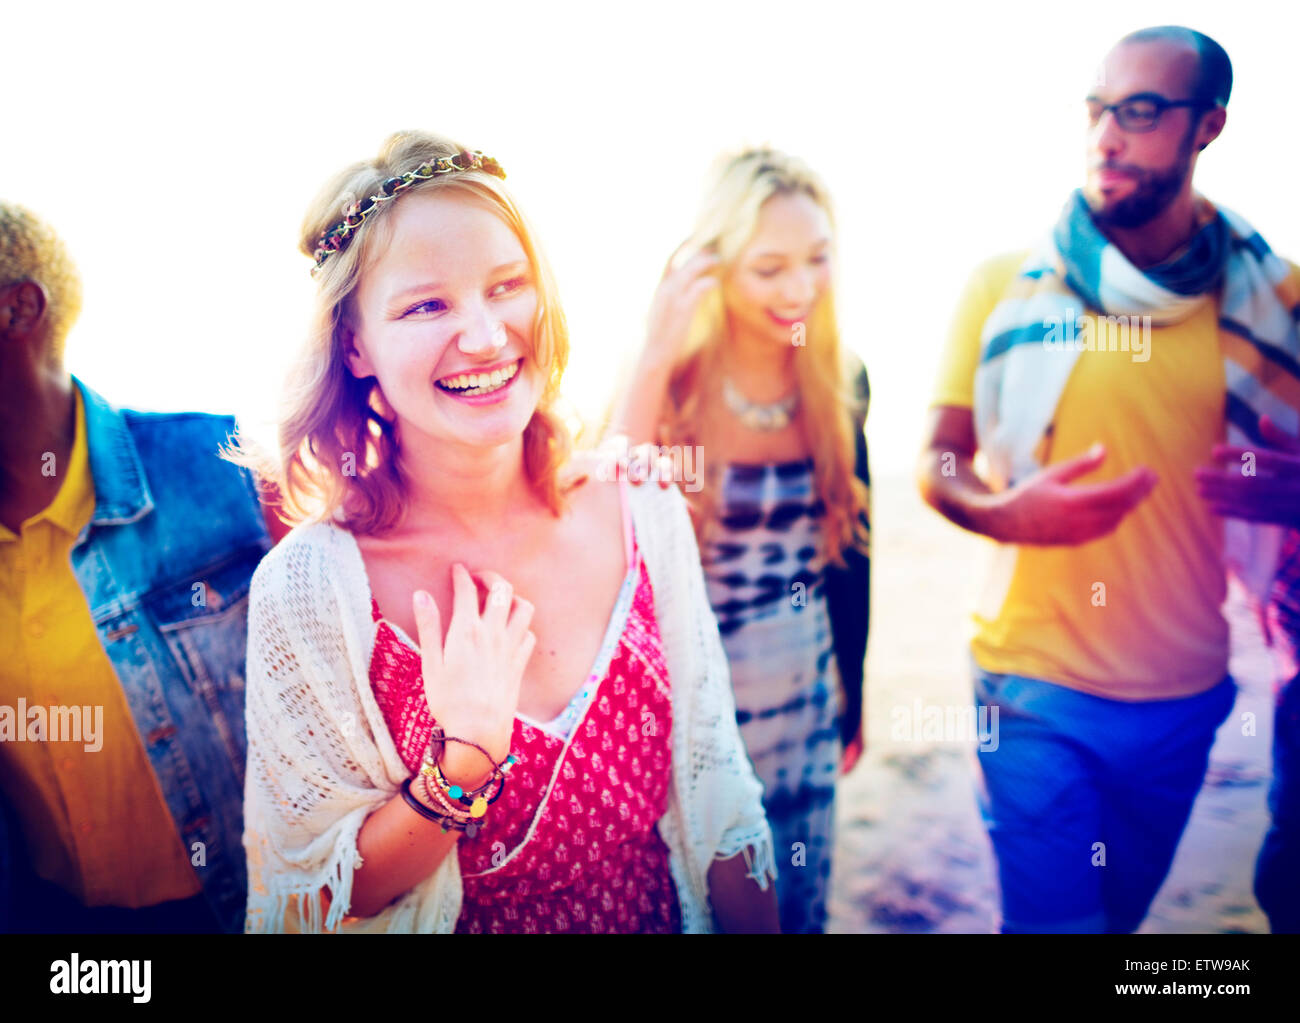 Friendship Bonding Relaxation Summer Beach Happiness Concept Stock Photo